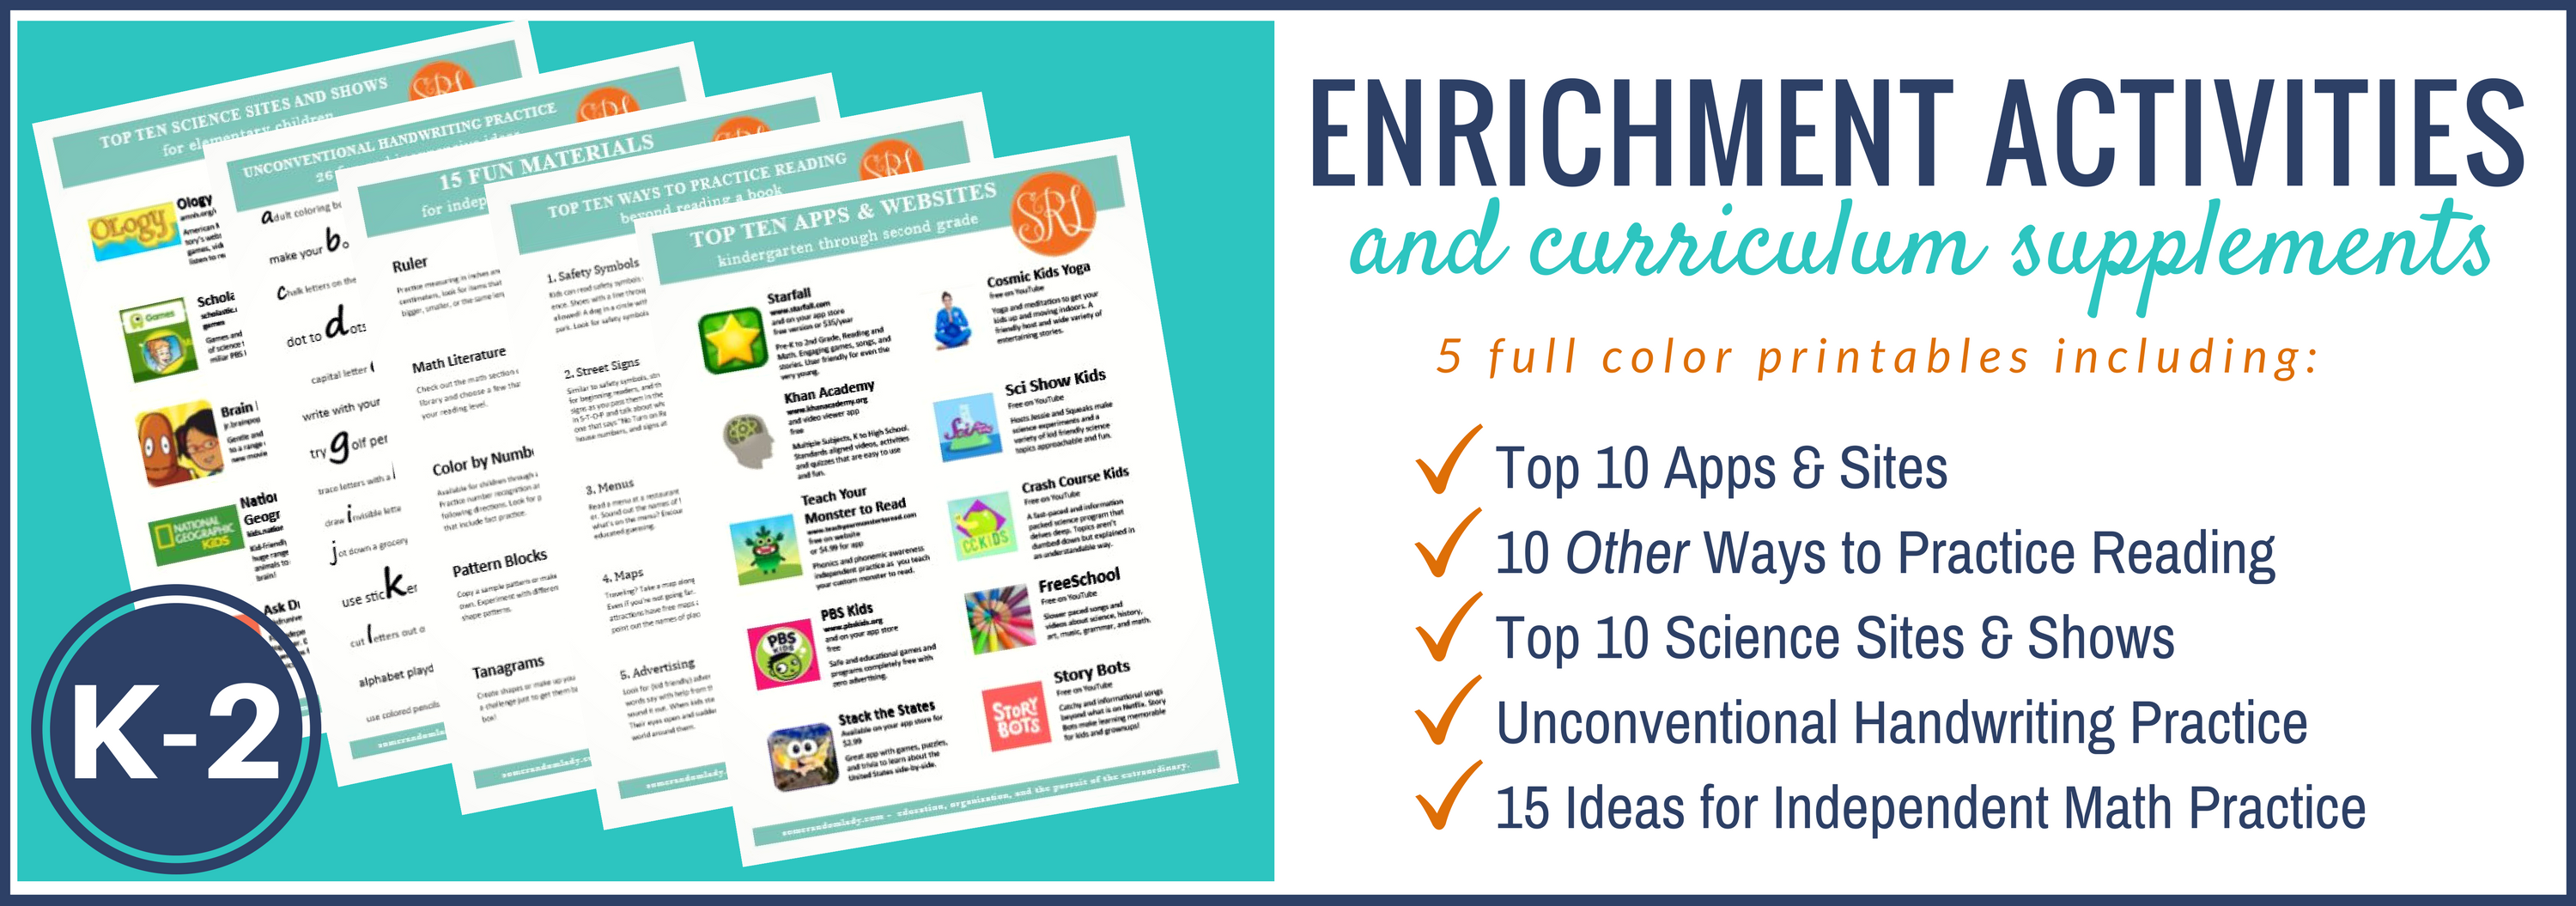 Free Printable Download: K-2 Enrichment and Curriculum Supplement Pack